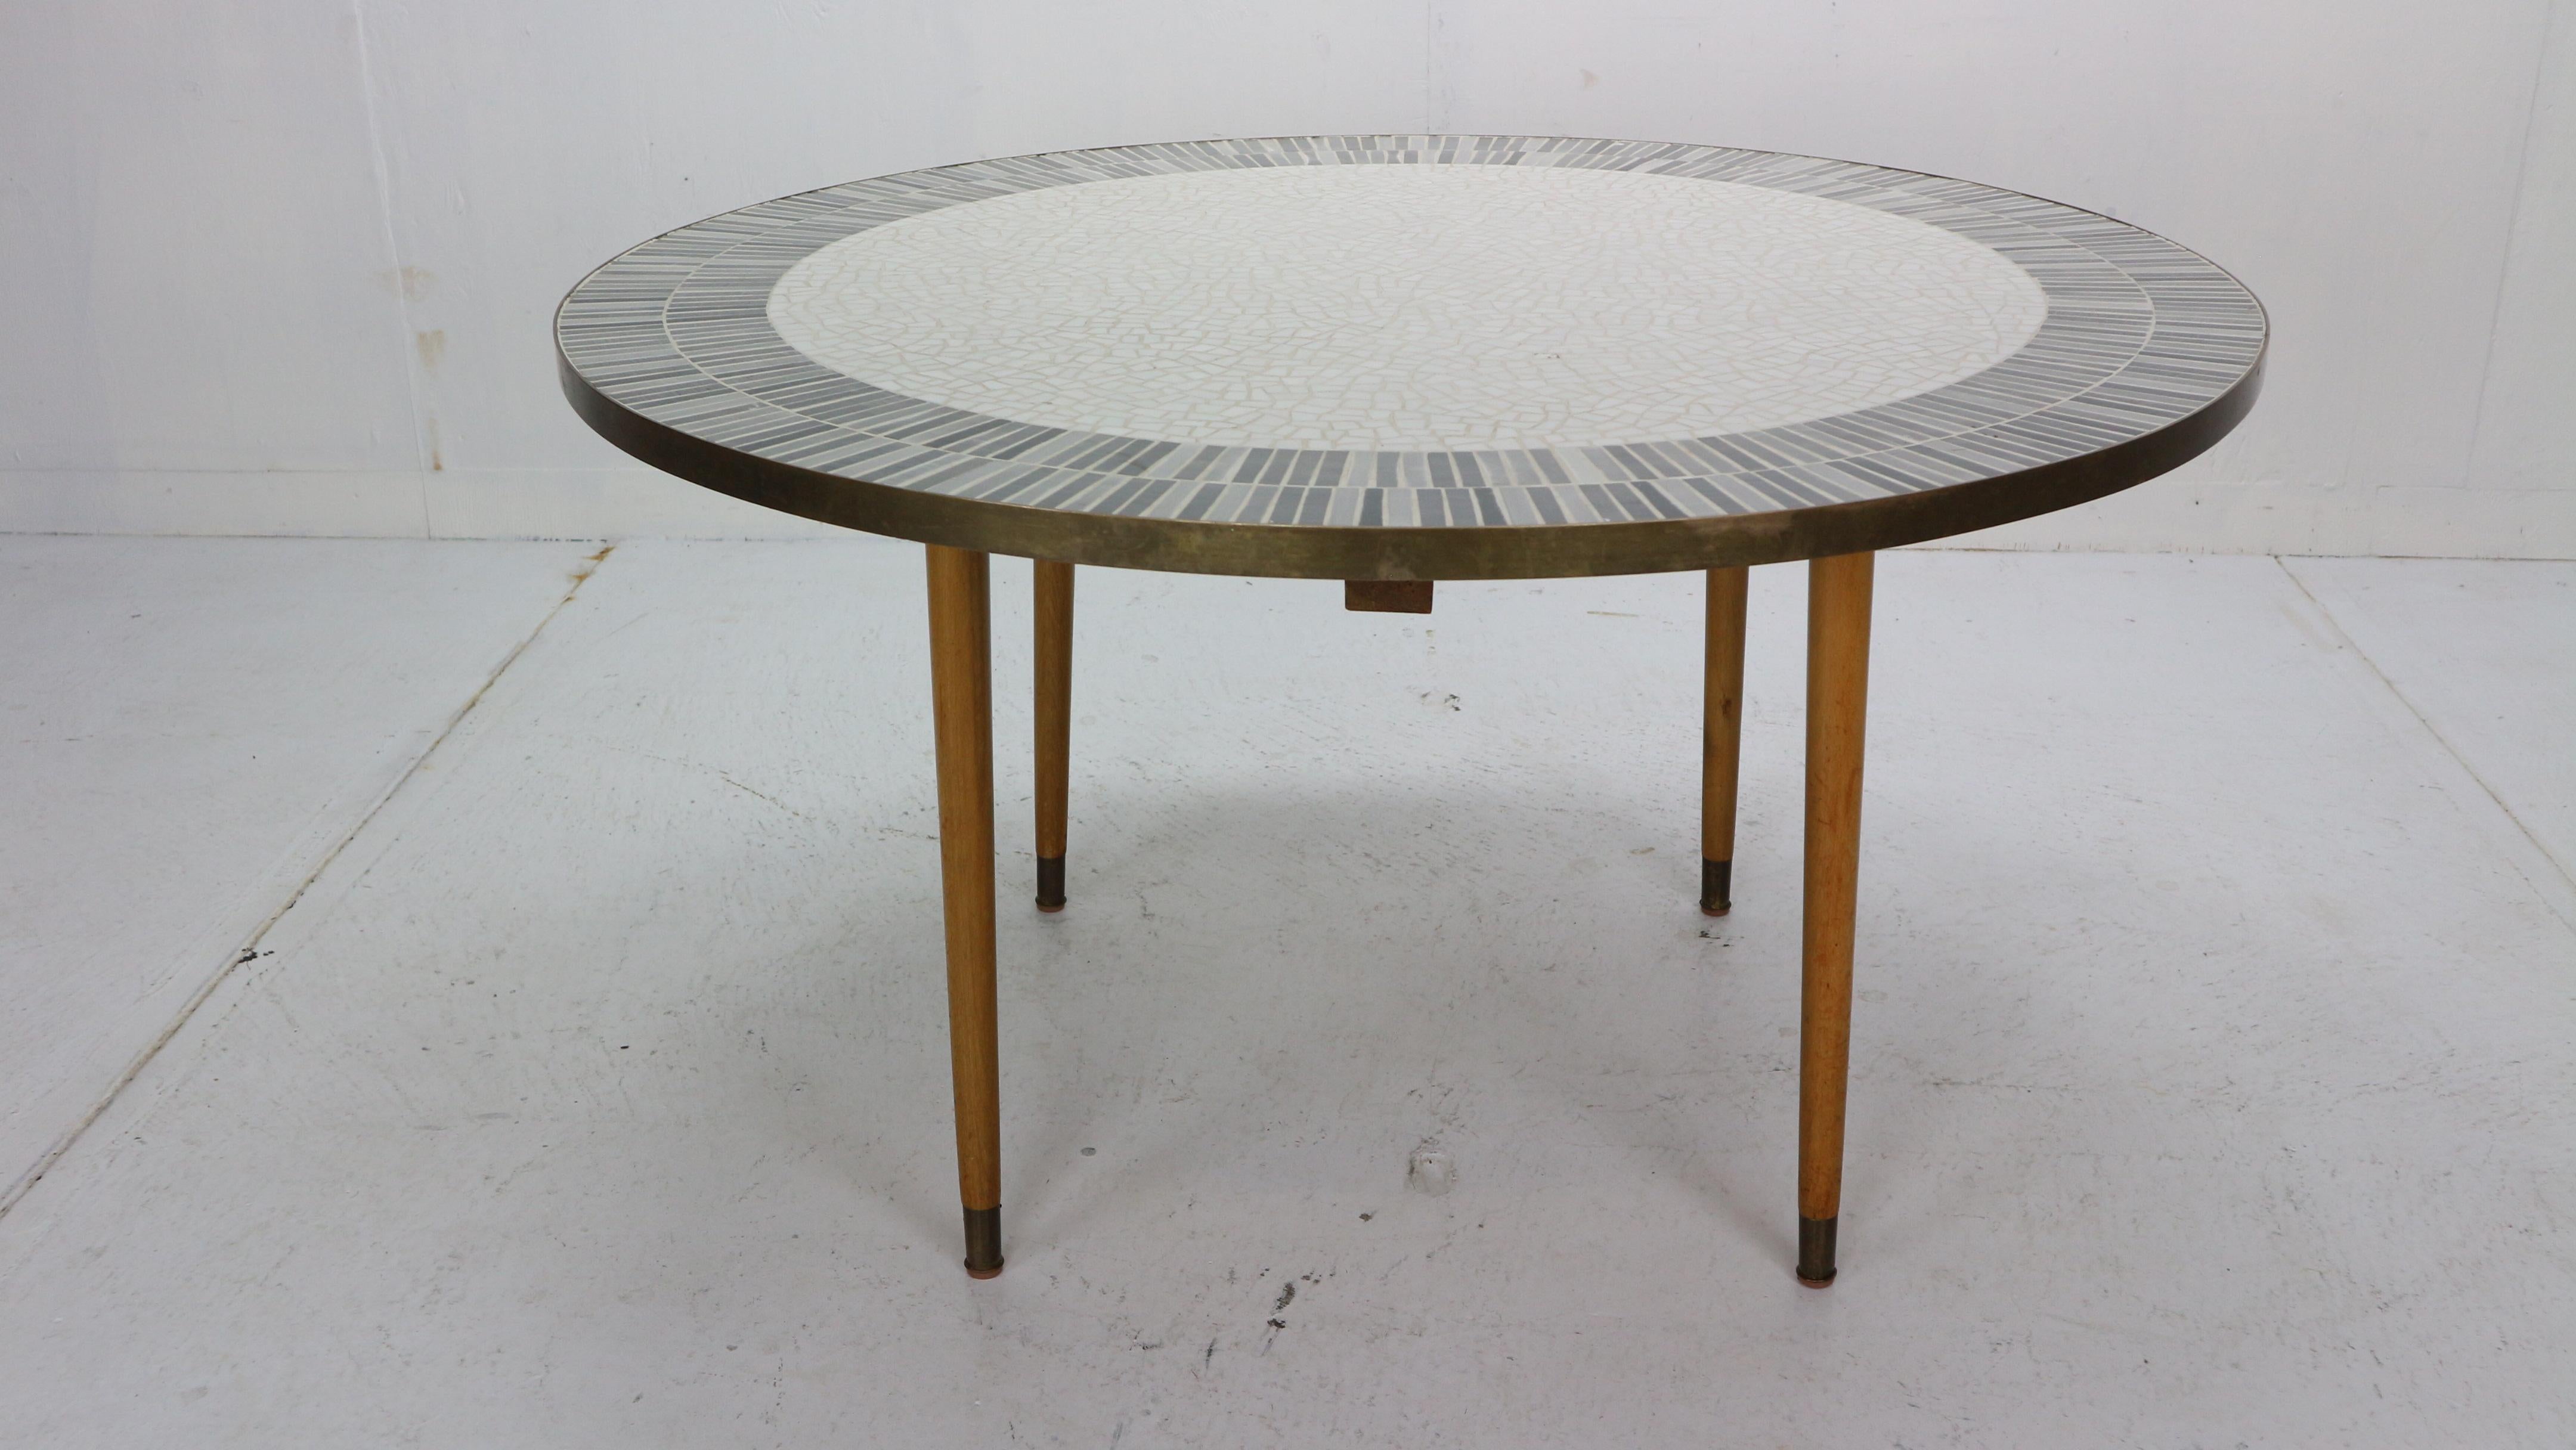 Round Mosaic top coffee table with a brass band around it on four brass and teak legs, by Berthold Muller, 1960s period, Germany.
The top has a beautiful abstract mosaic composition. Great elegance and rarely encountered. Muller-Oerlinghausen